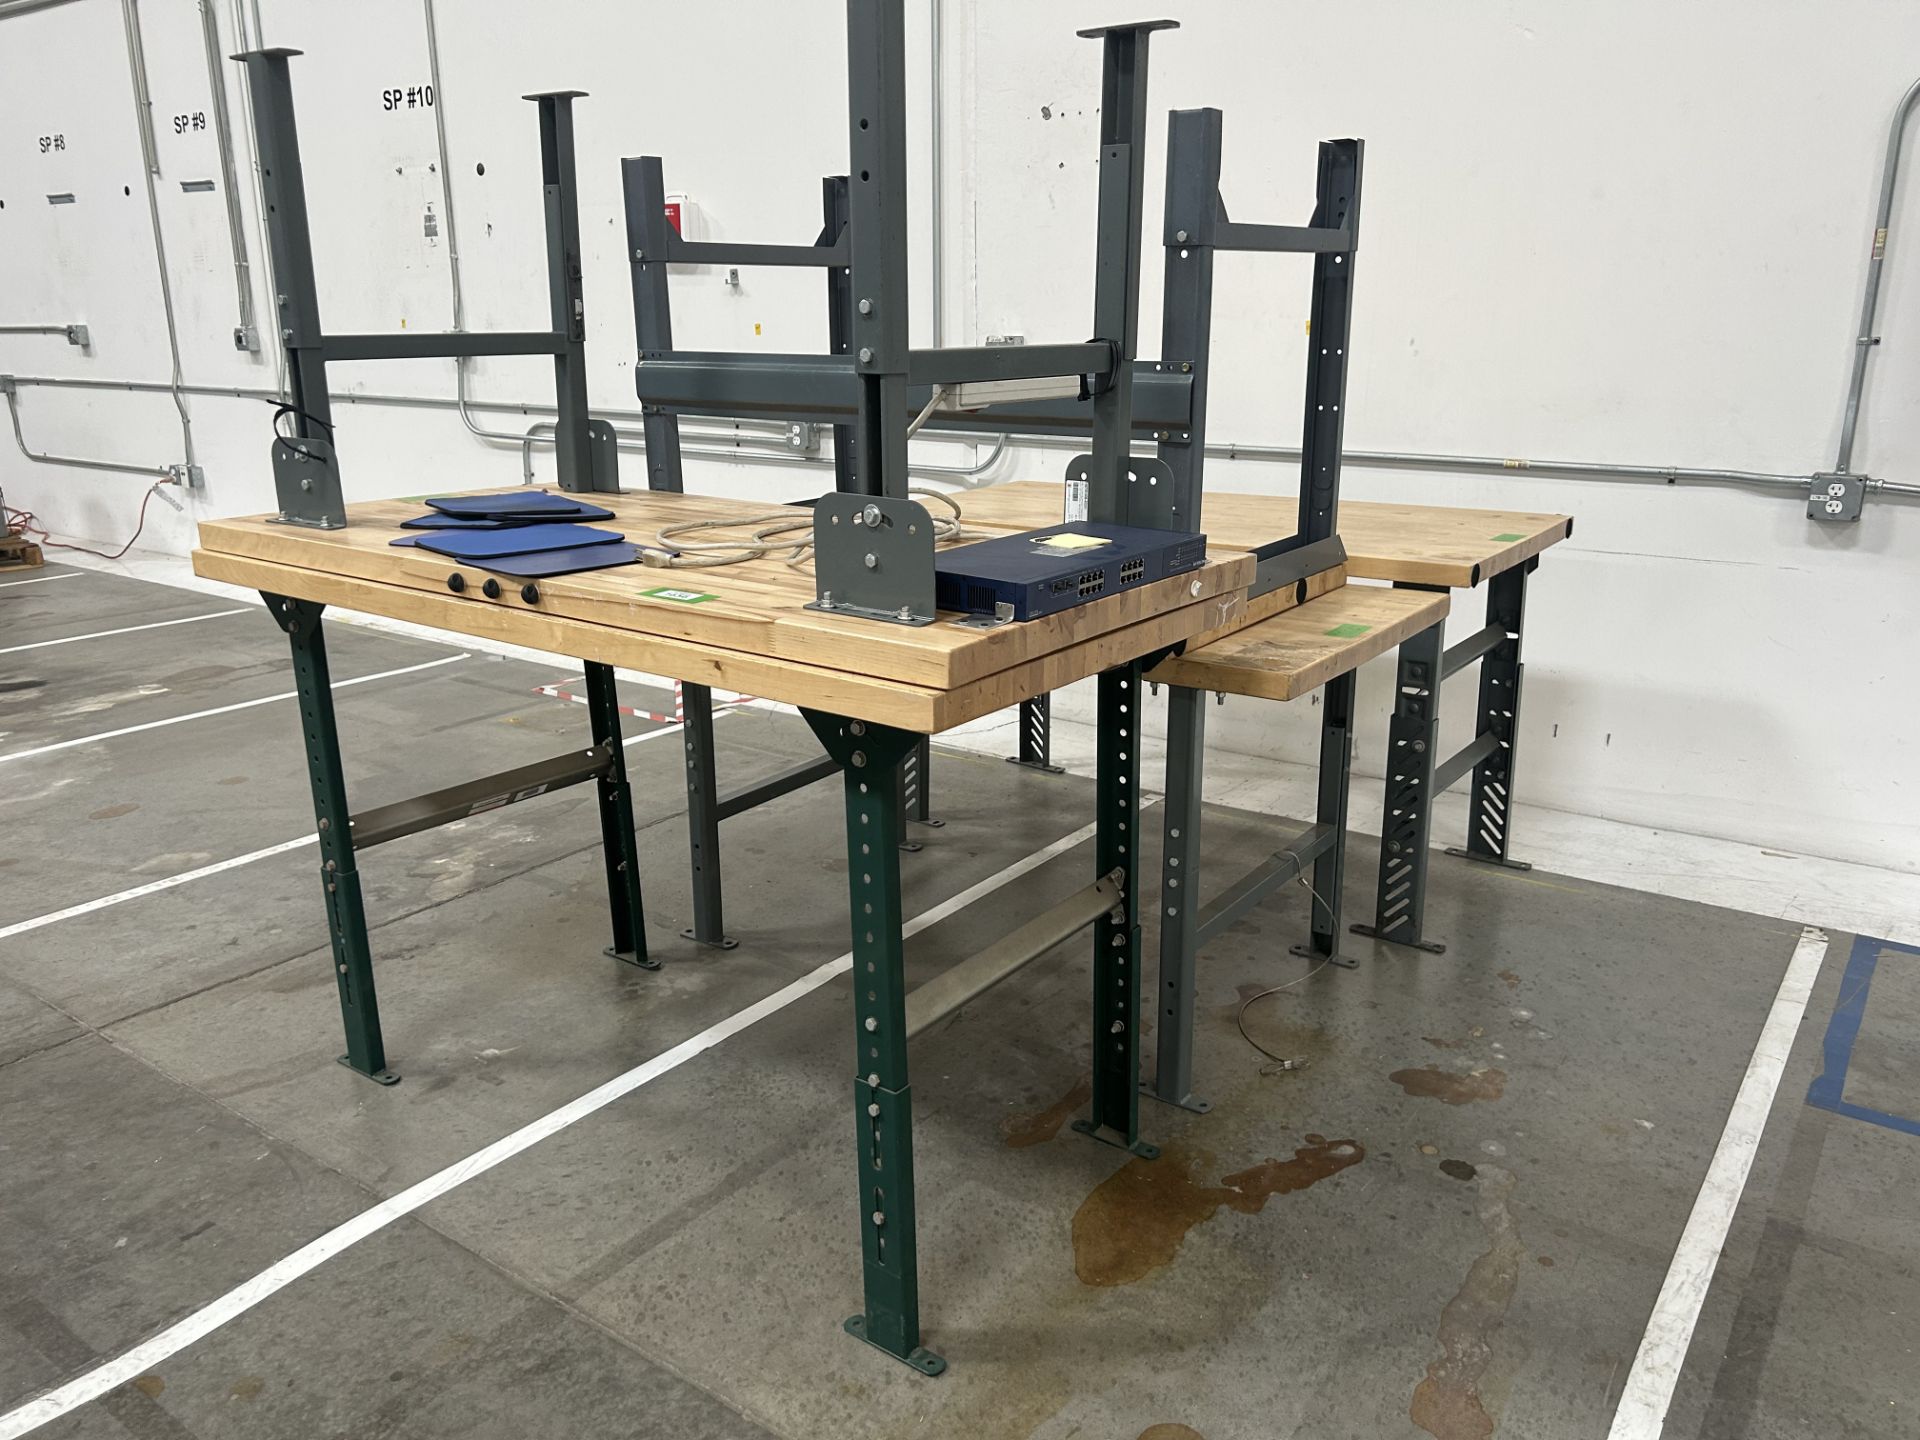 5 Work Tables 60" x 30"